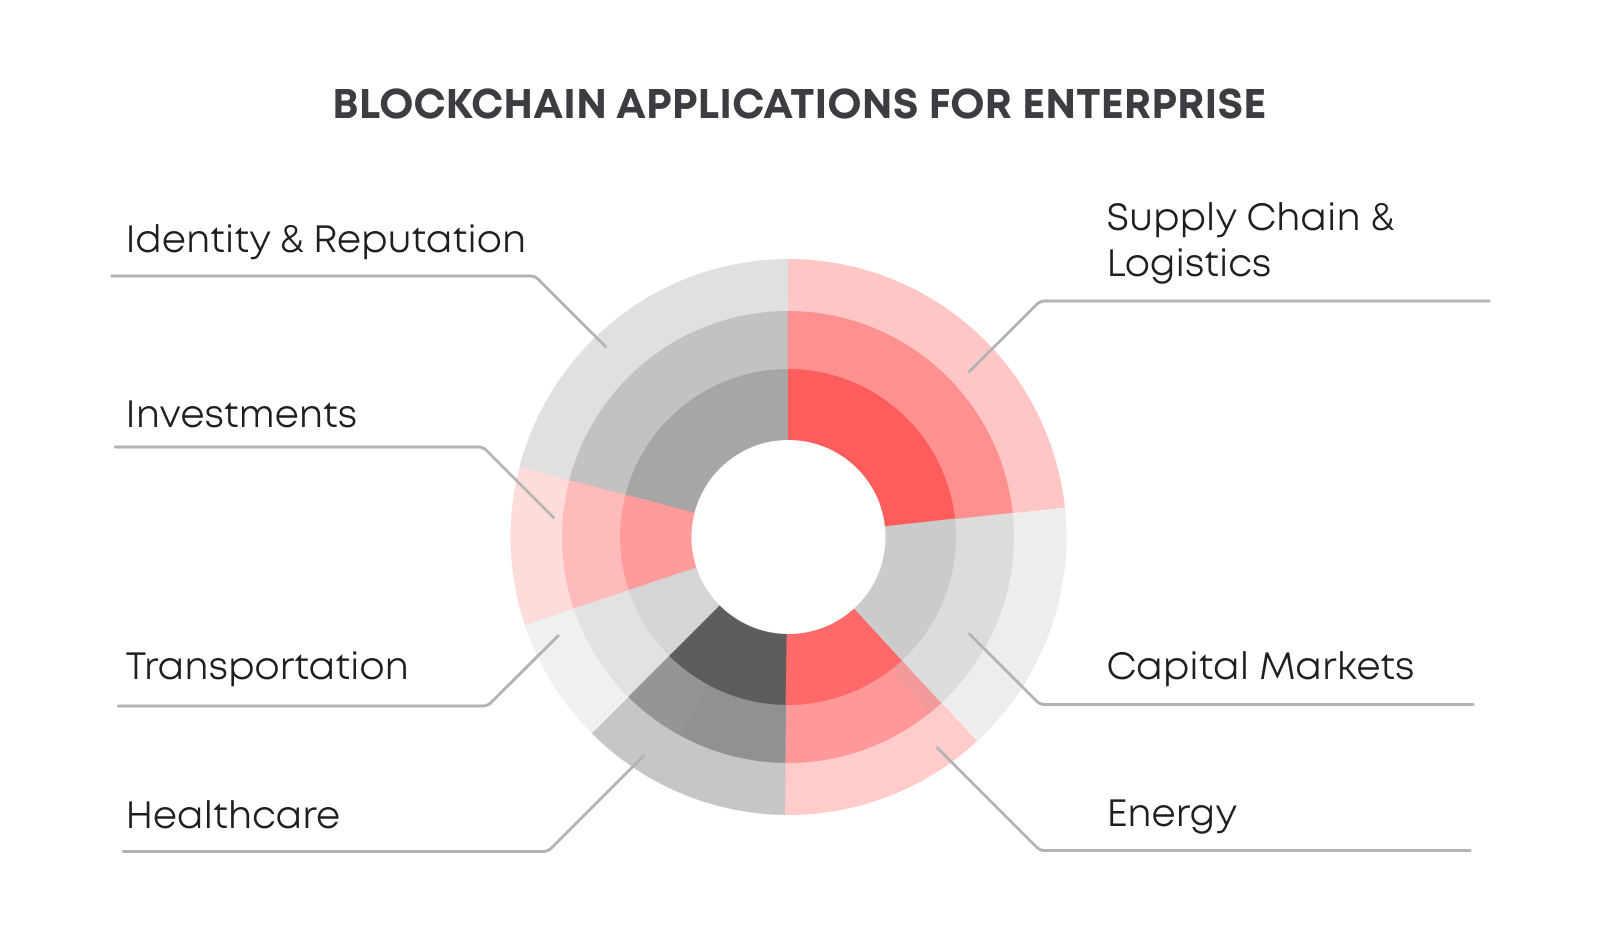 Integrating blockchain into a business starts with a clear understanding of its potential and aligning it with business objectives.